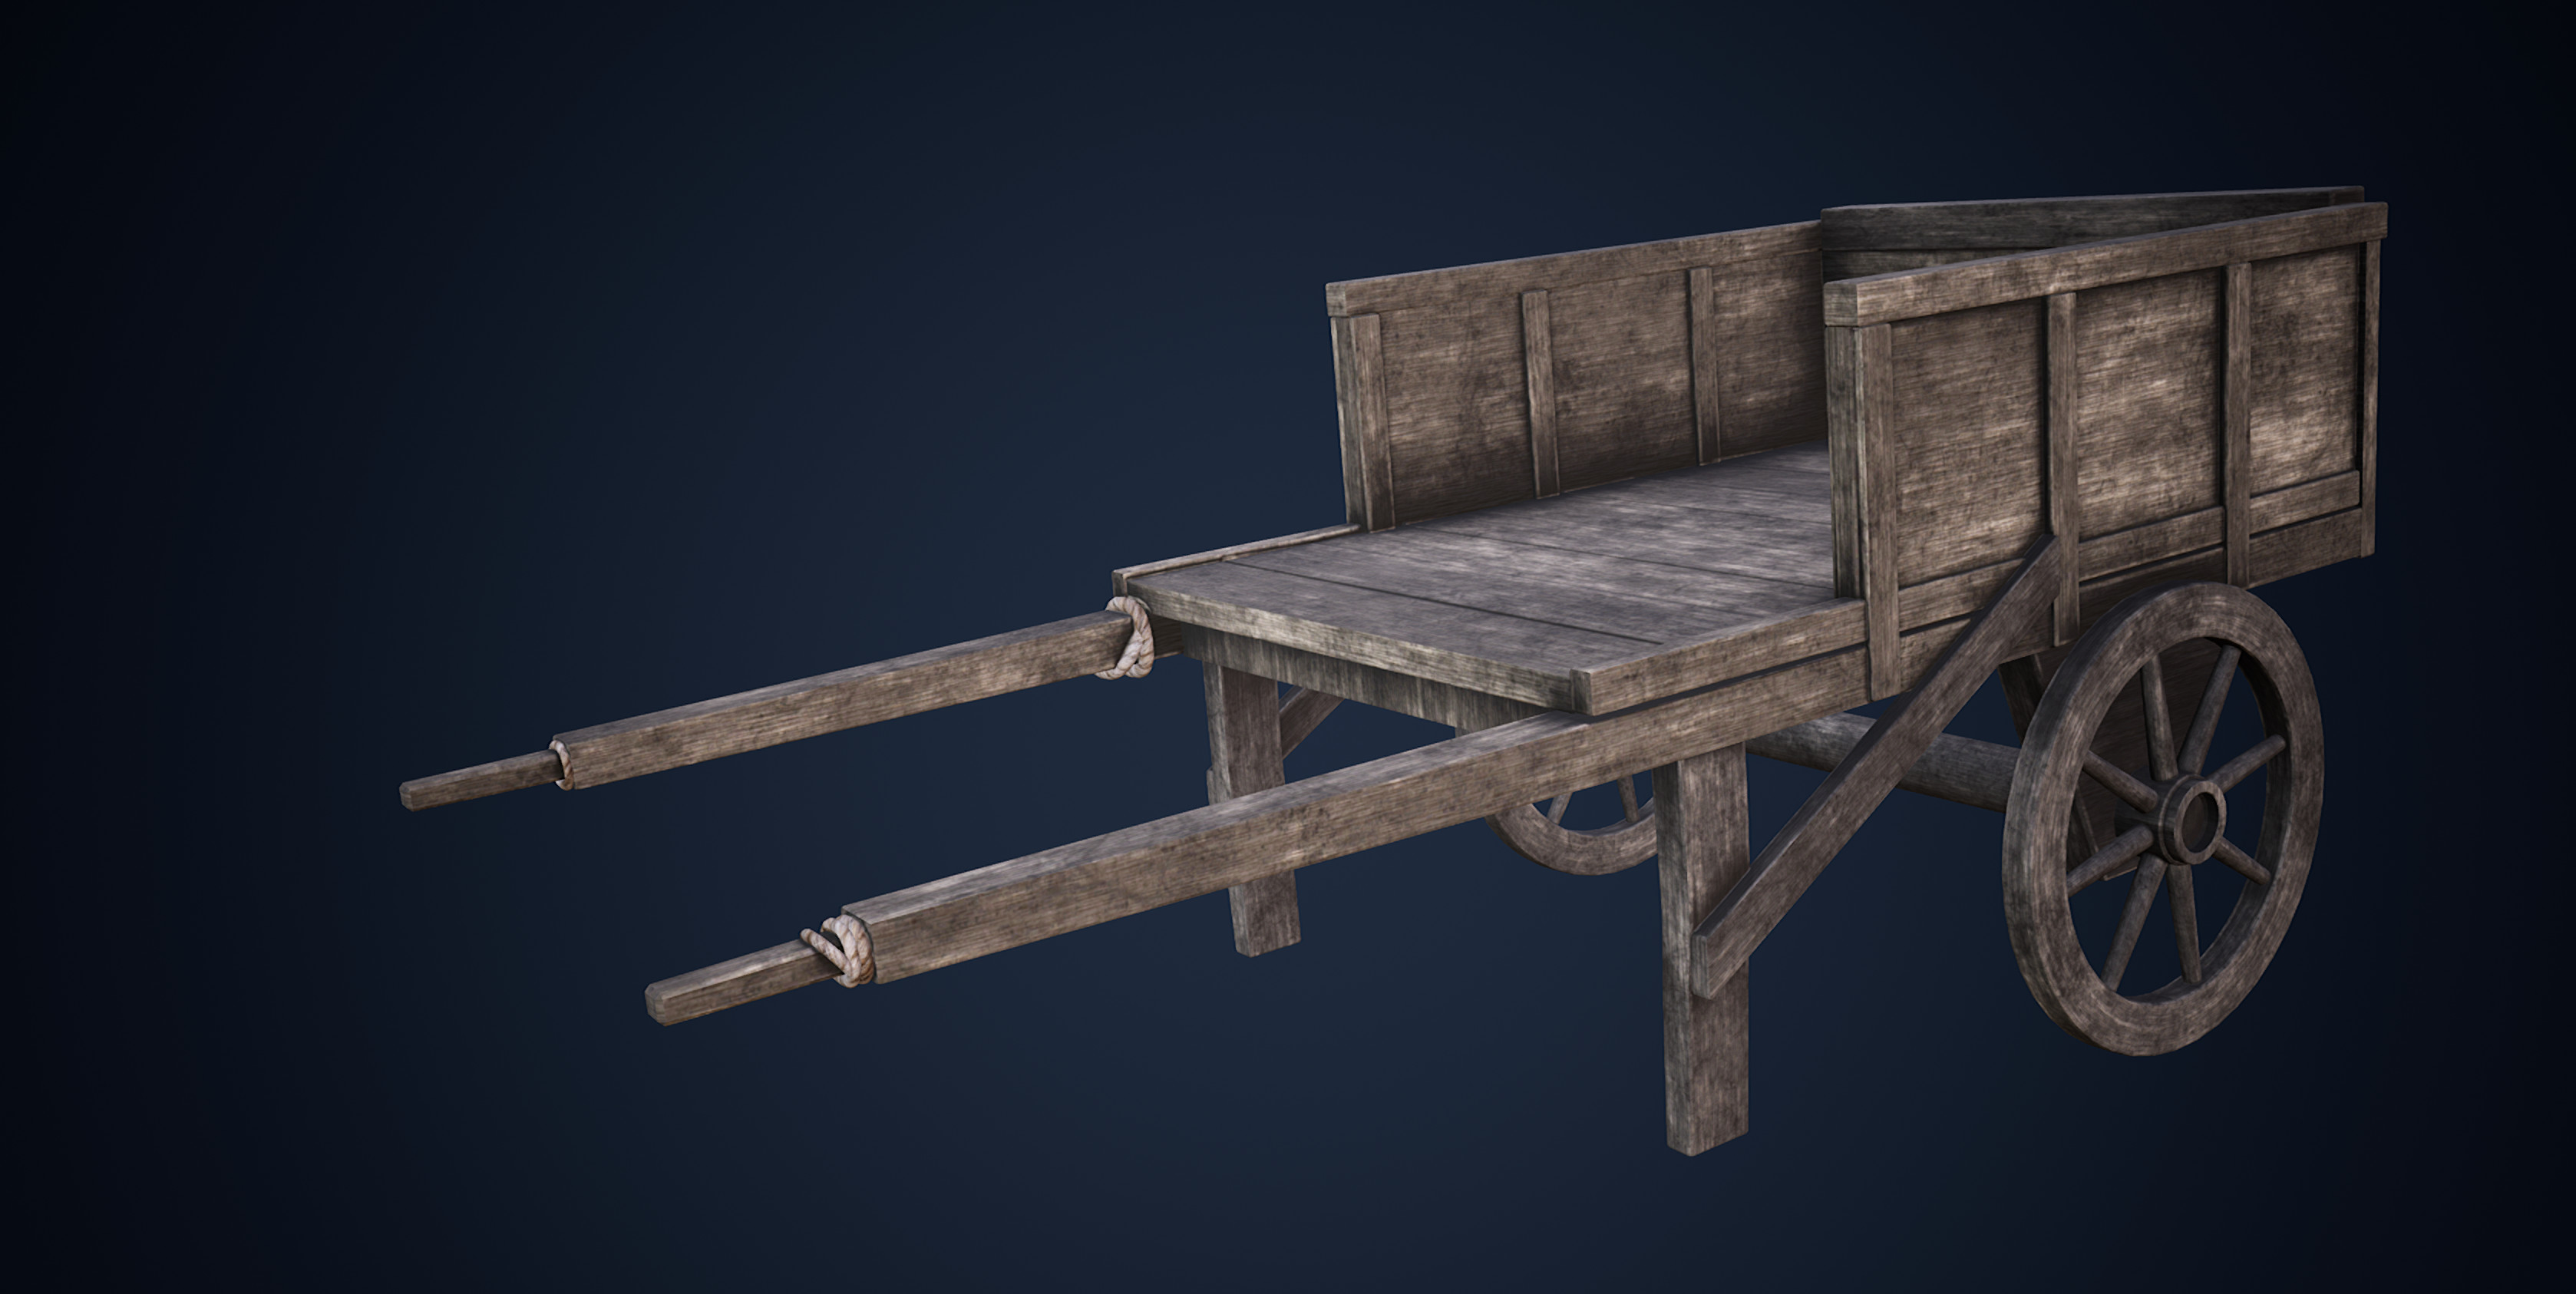 A Wagon (Painted with Substance)